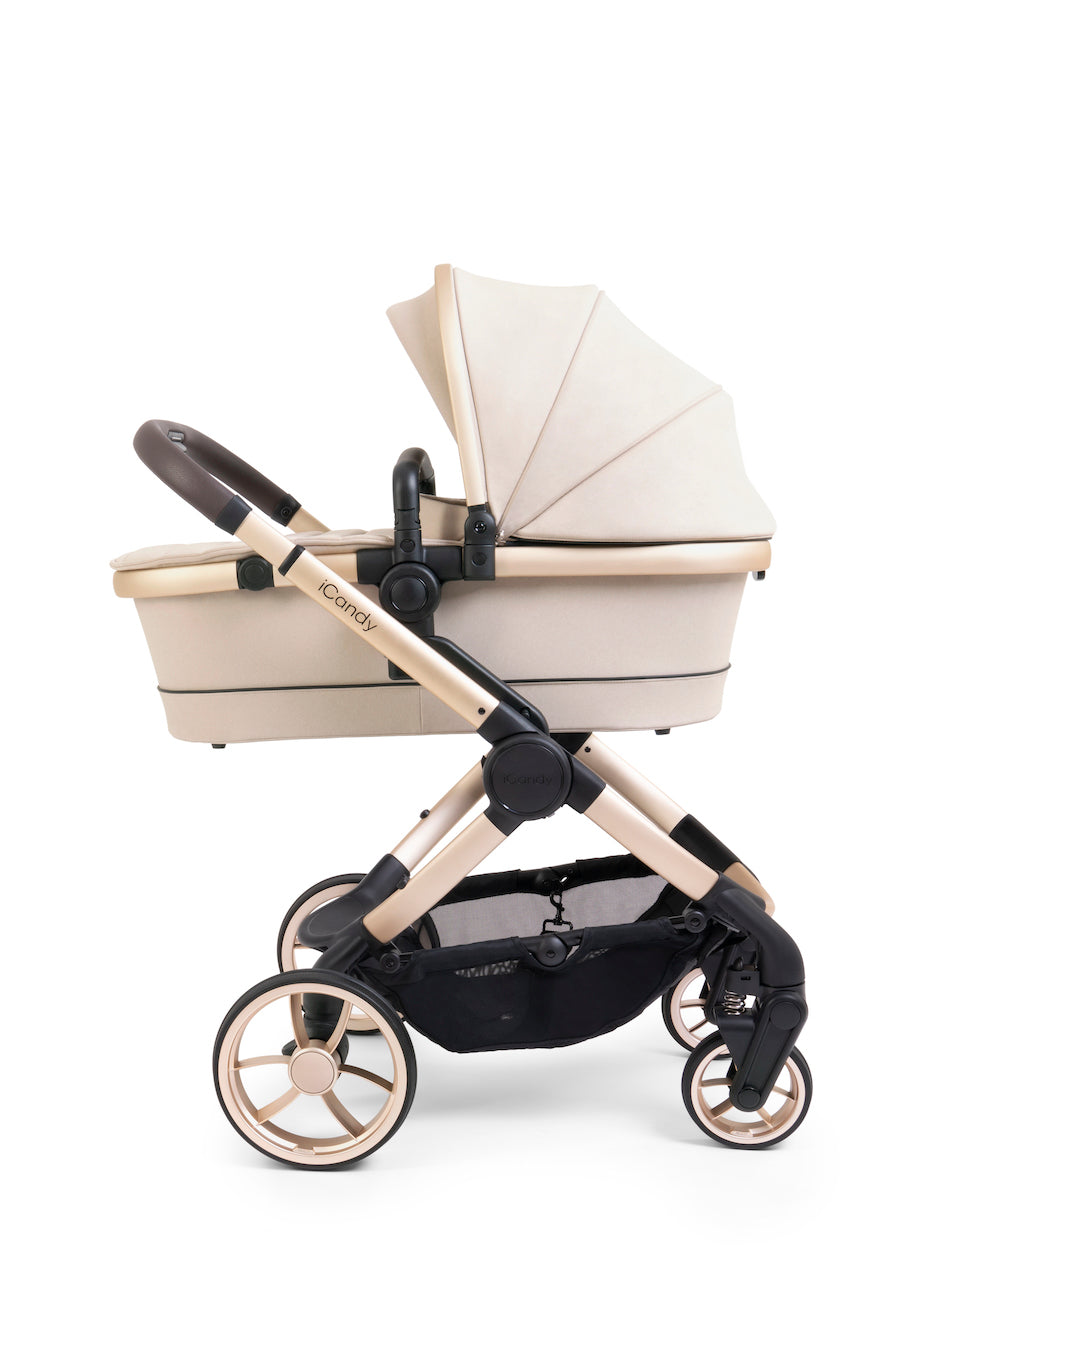 iCandy Peach 7 Pushchair & Cybex Cloud T Travel System - Biscotti | Blonde Chassis